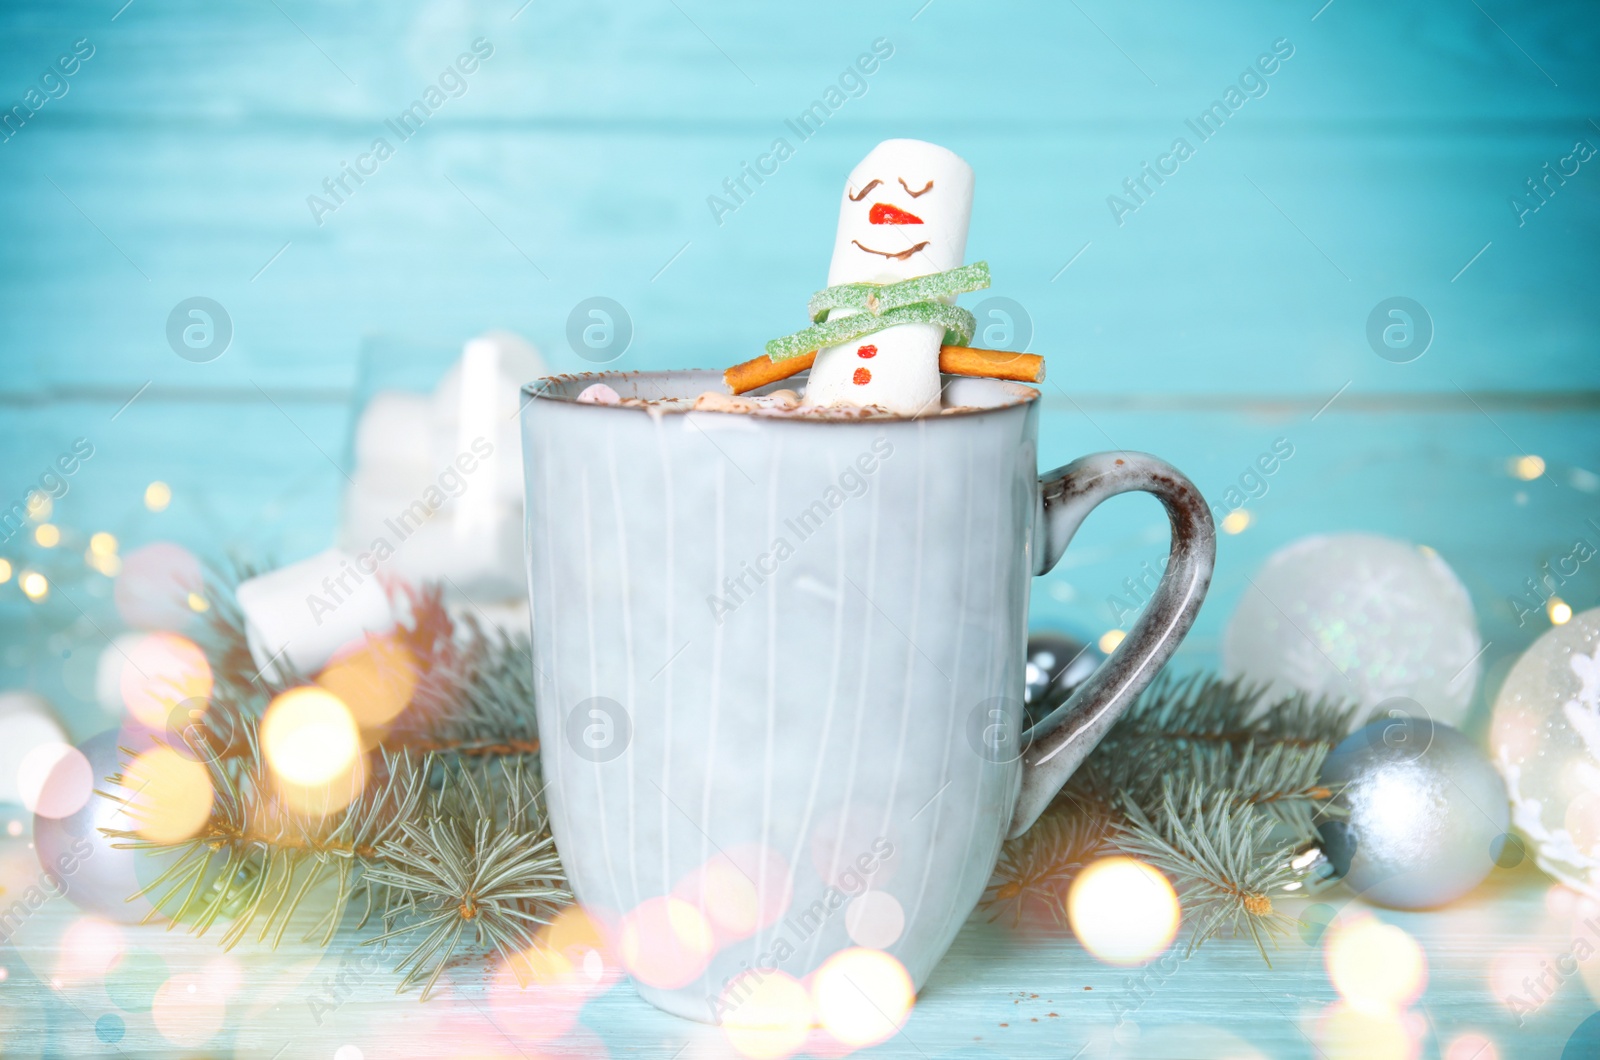 Image of Funny marshmallow snowman in cup of hot drink on light blue wooden table. Bokeh effect